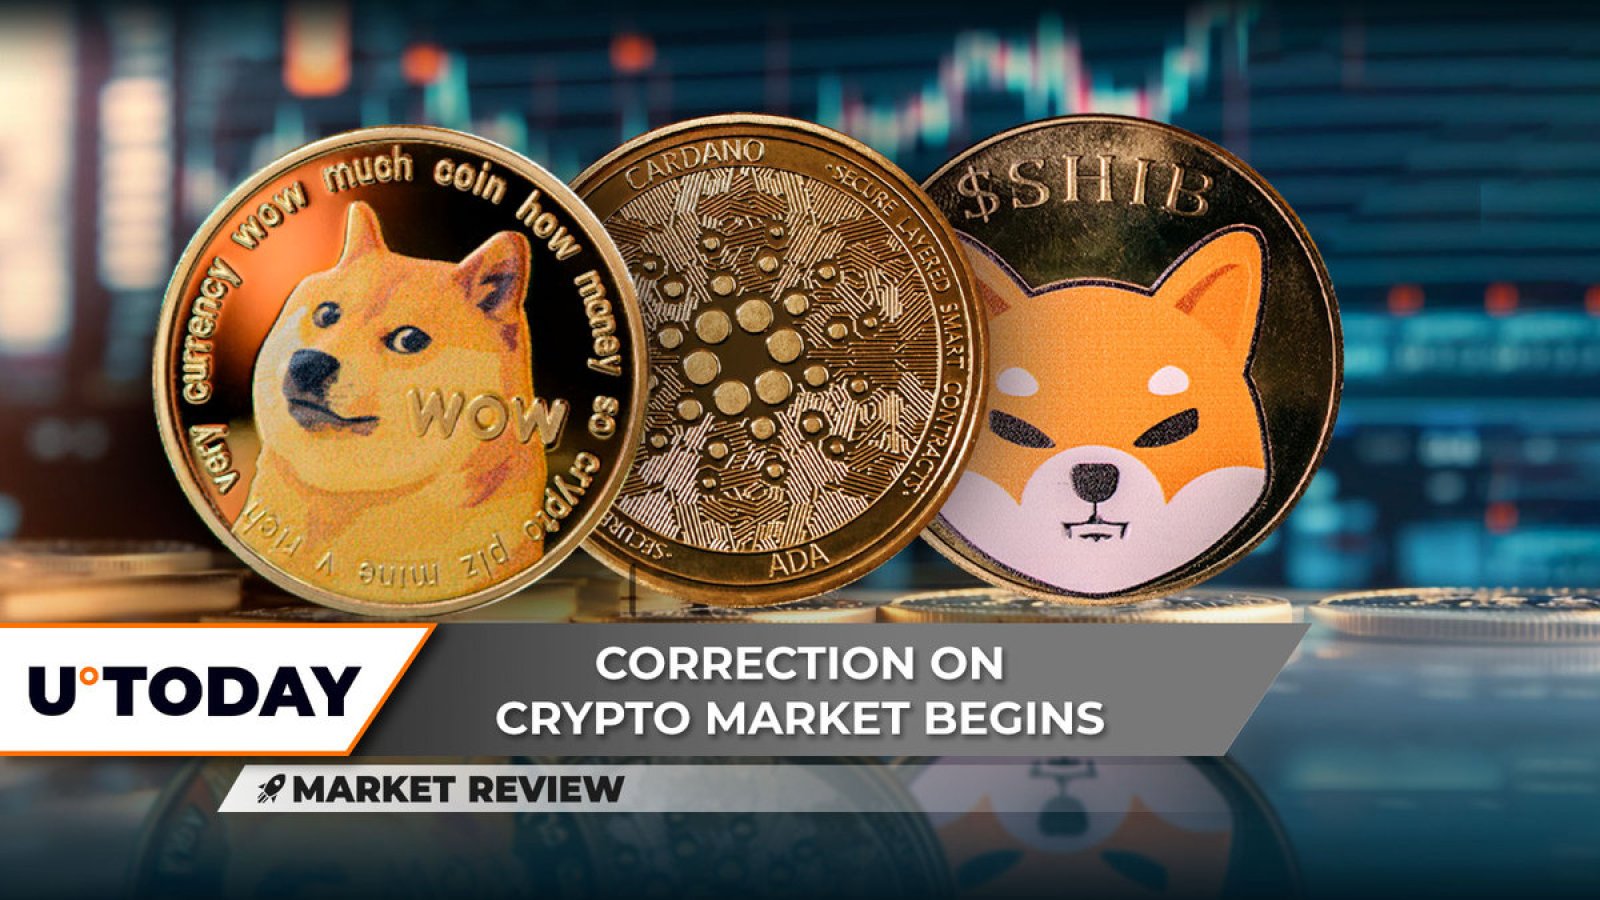 Dogecoin (DOGE) Offers an Important Signal: Did Cardano (ADA) Form a Double Top Pattern?  Shiba Inu (SHIB) Correction Begins